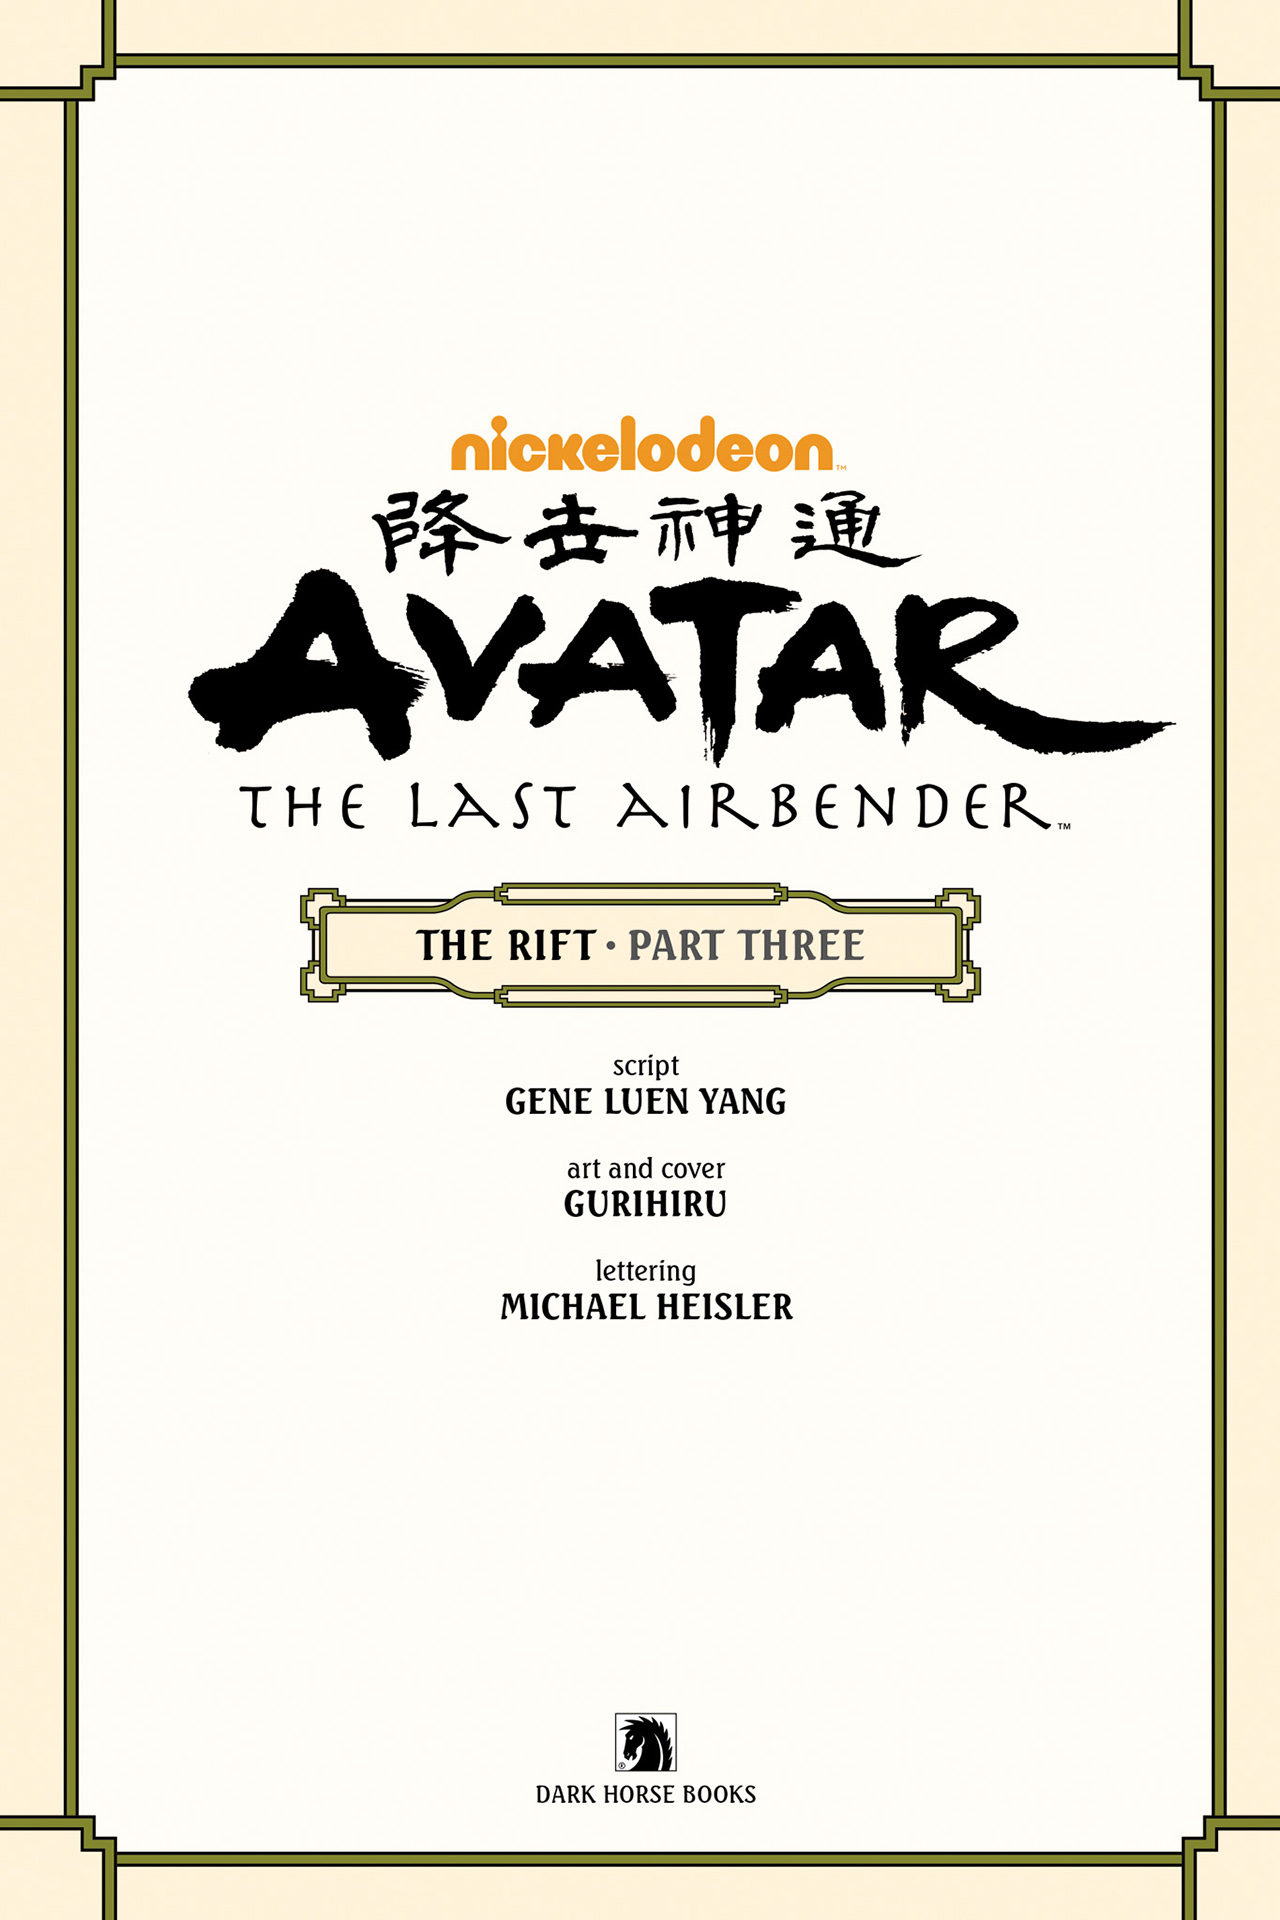 Read online Nickelodeon Avatar: The Last Airbender - The Rift comic -  Issue # Part 3 - 4